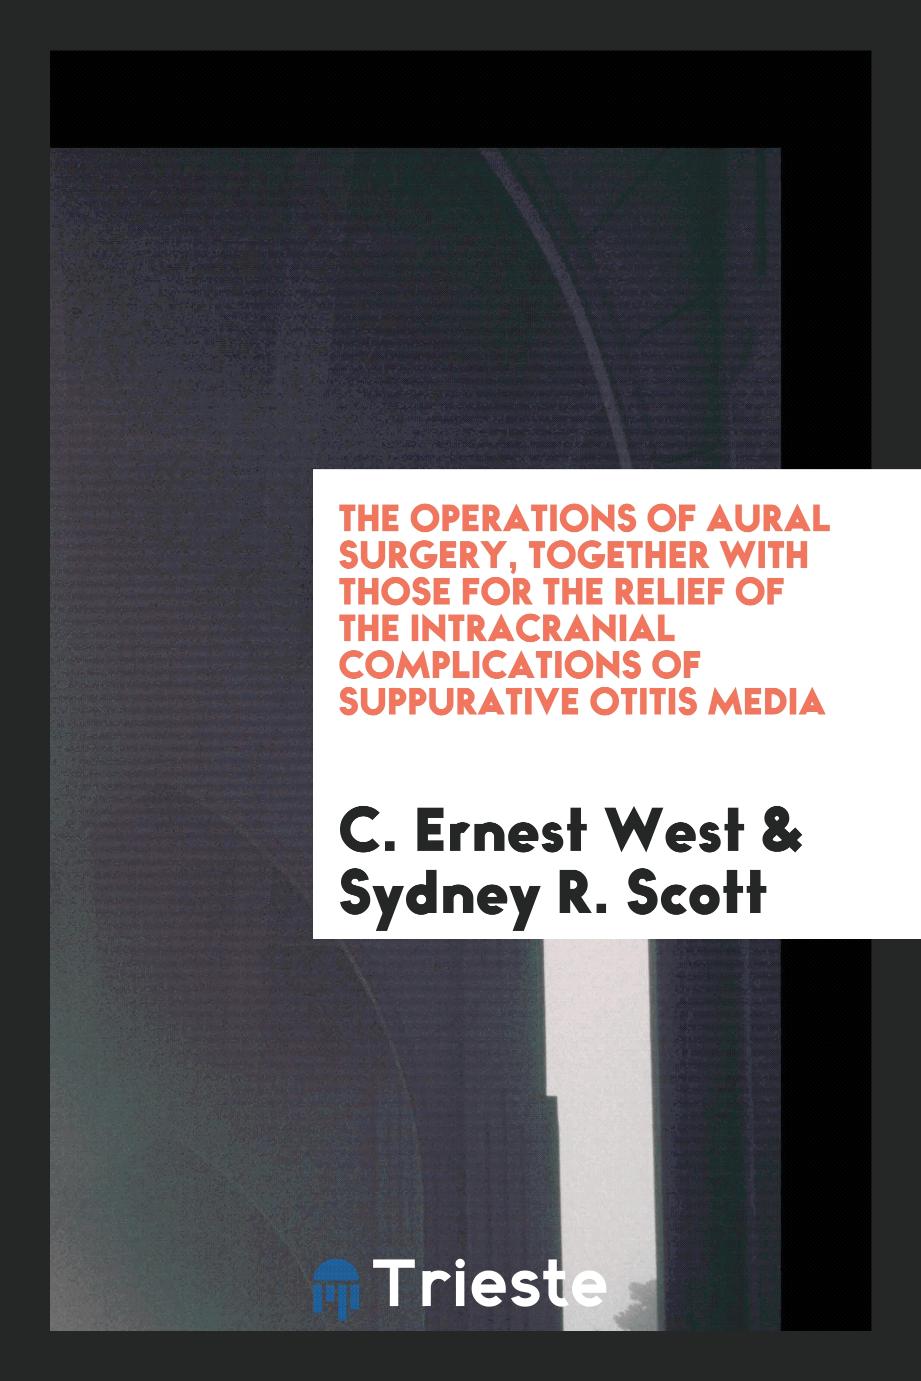 The operations of aural surgery, together with those for the relief of the intracranial complications of suppurative otitis media